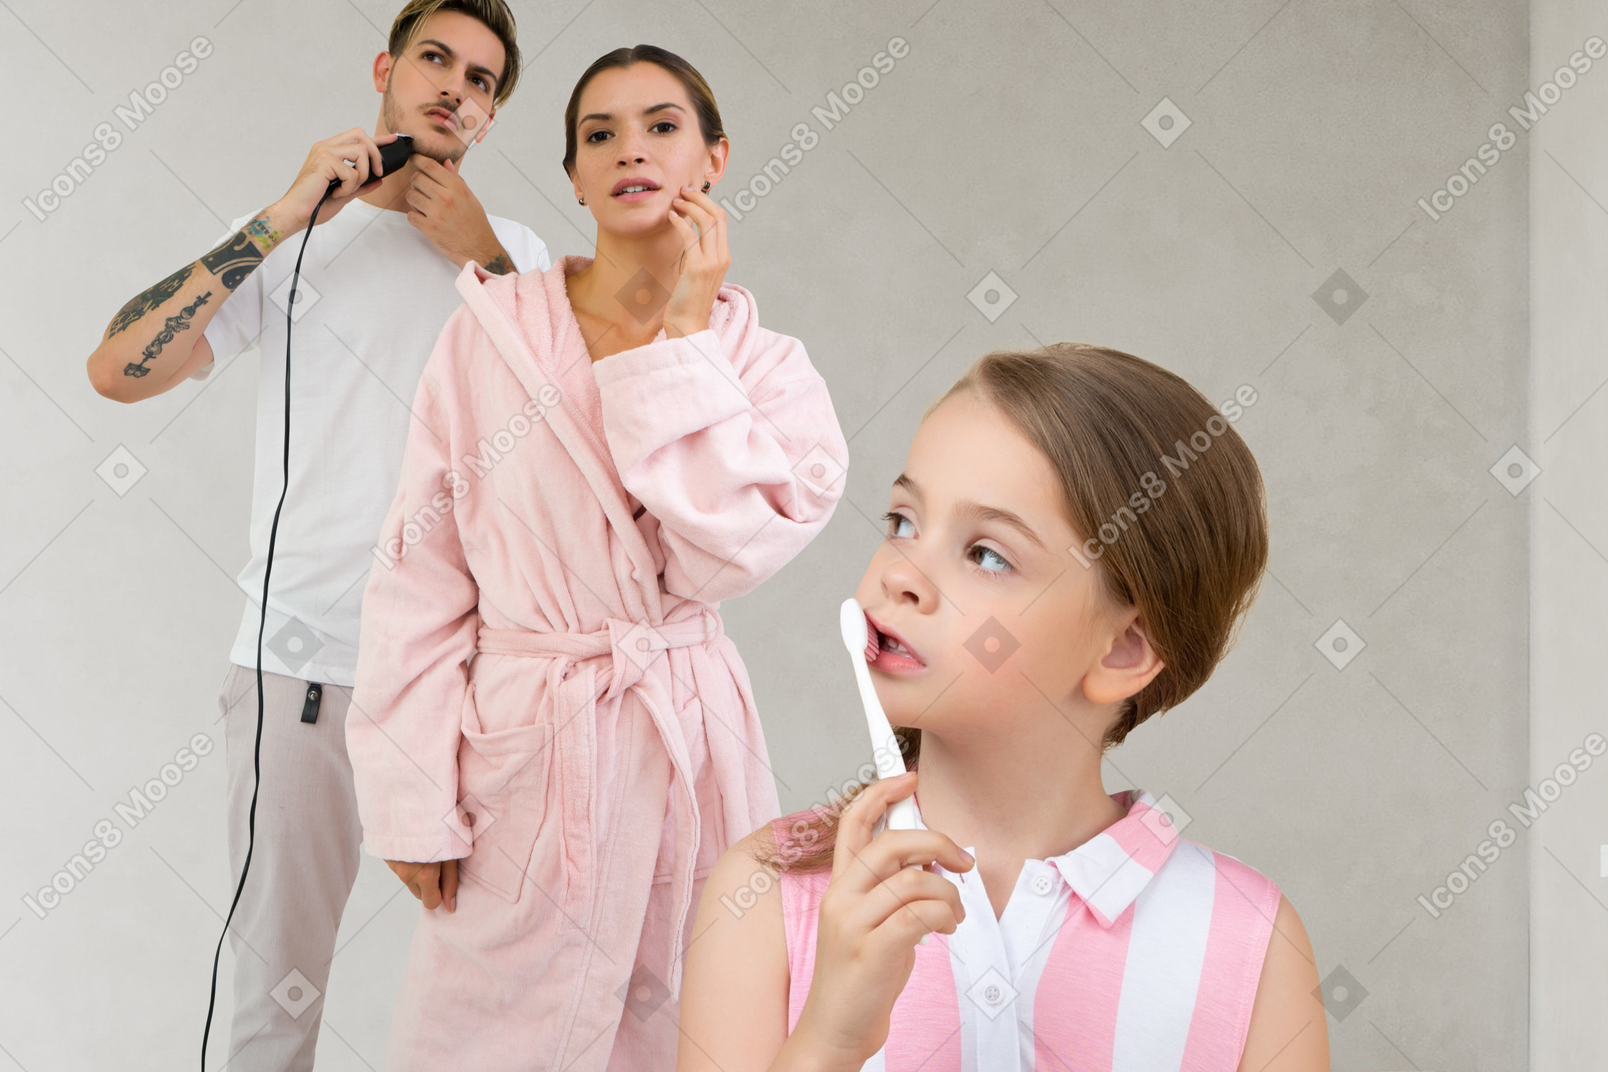 A young girl brushing her teeth, a woman touching her face and a man shaving